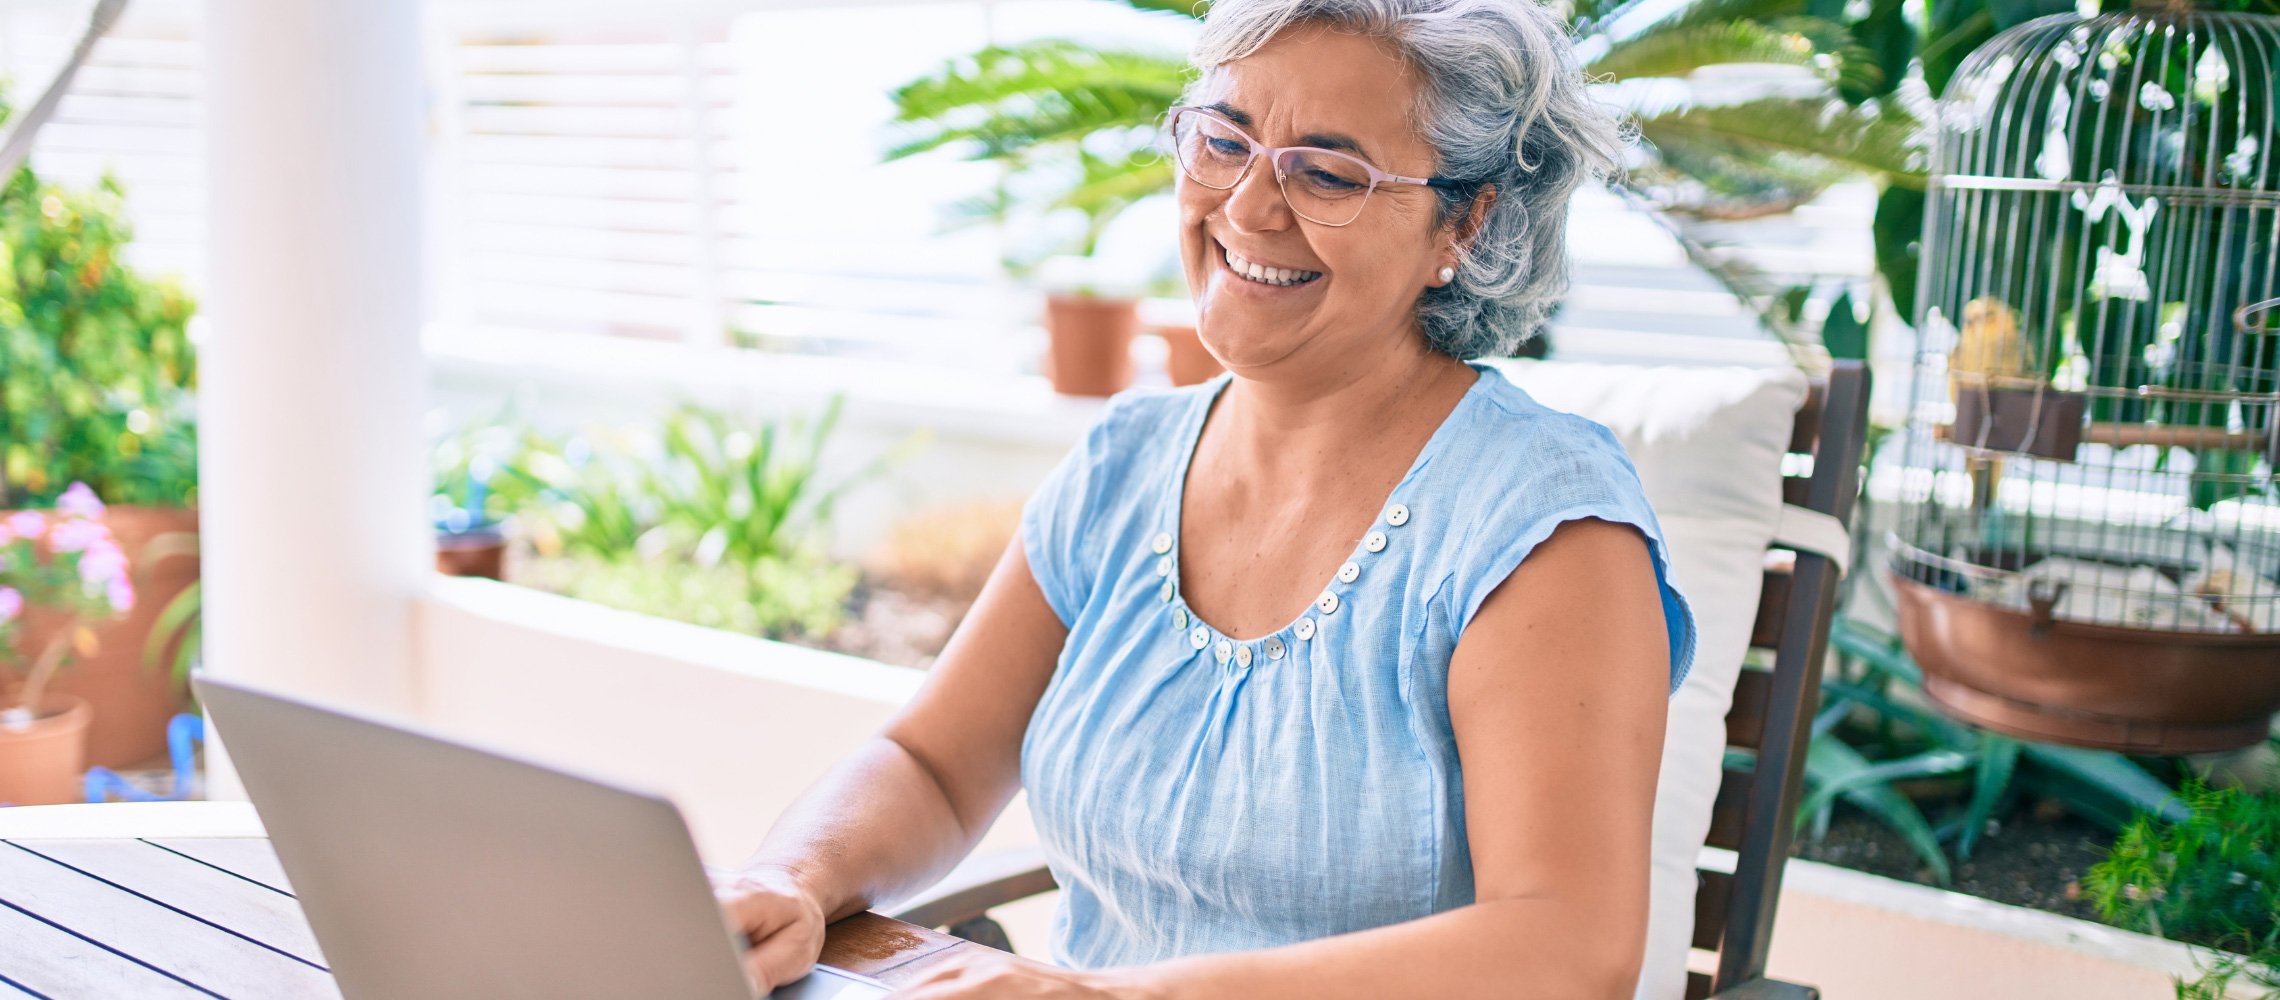 Elderly lady smiling at laptop while seated